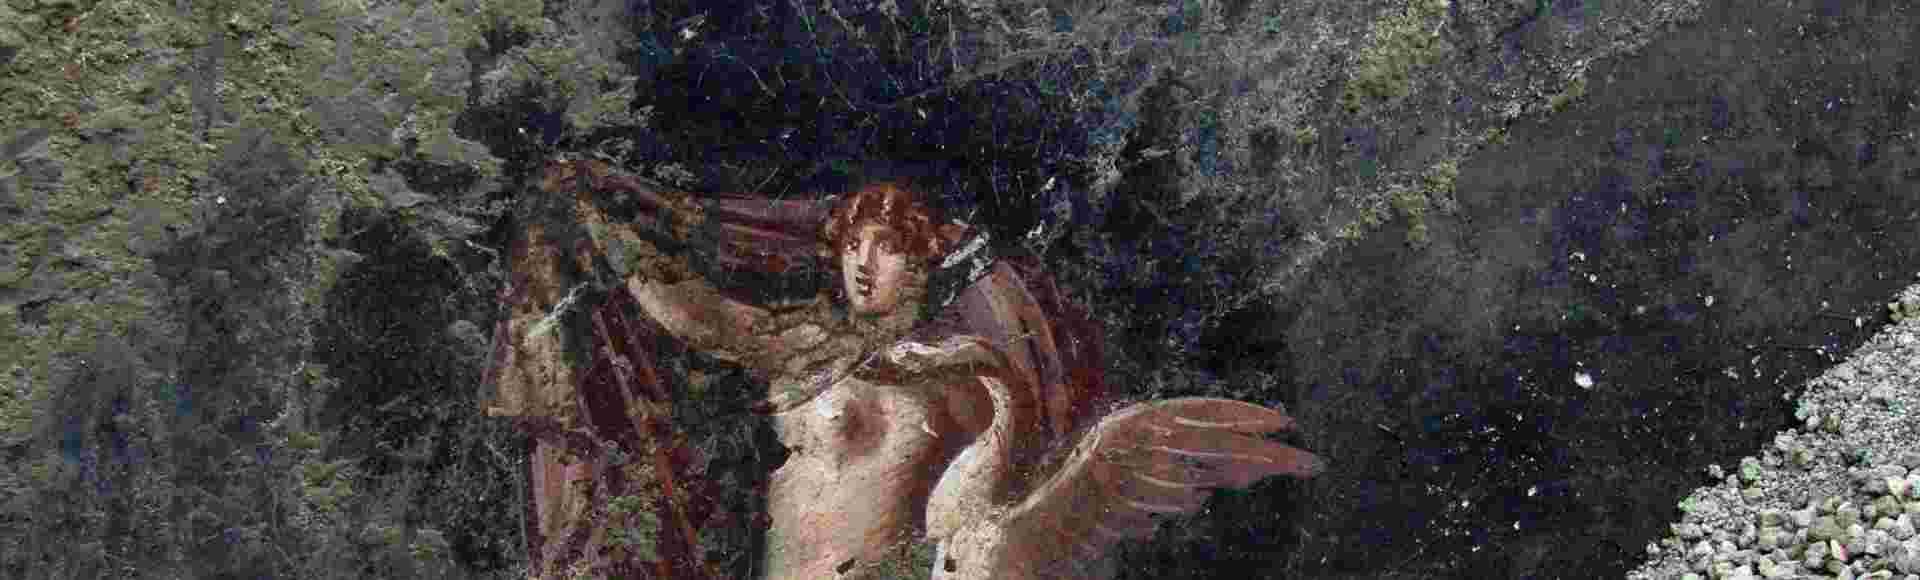 Fresco representing Jupiter's lover Leda and the swan on a wall of a spectacular banqueting room with elegant black walls, recently brought to light during the excavations currently underway at Pompeii.